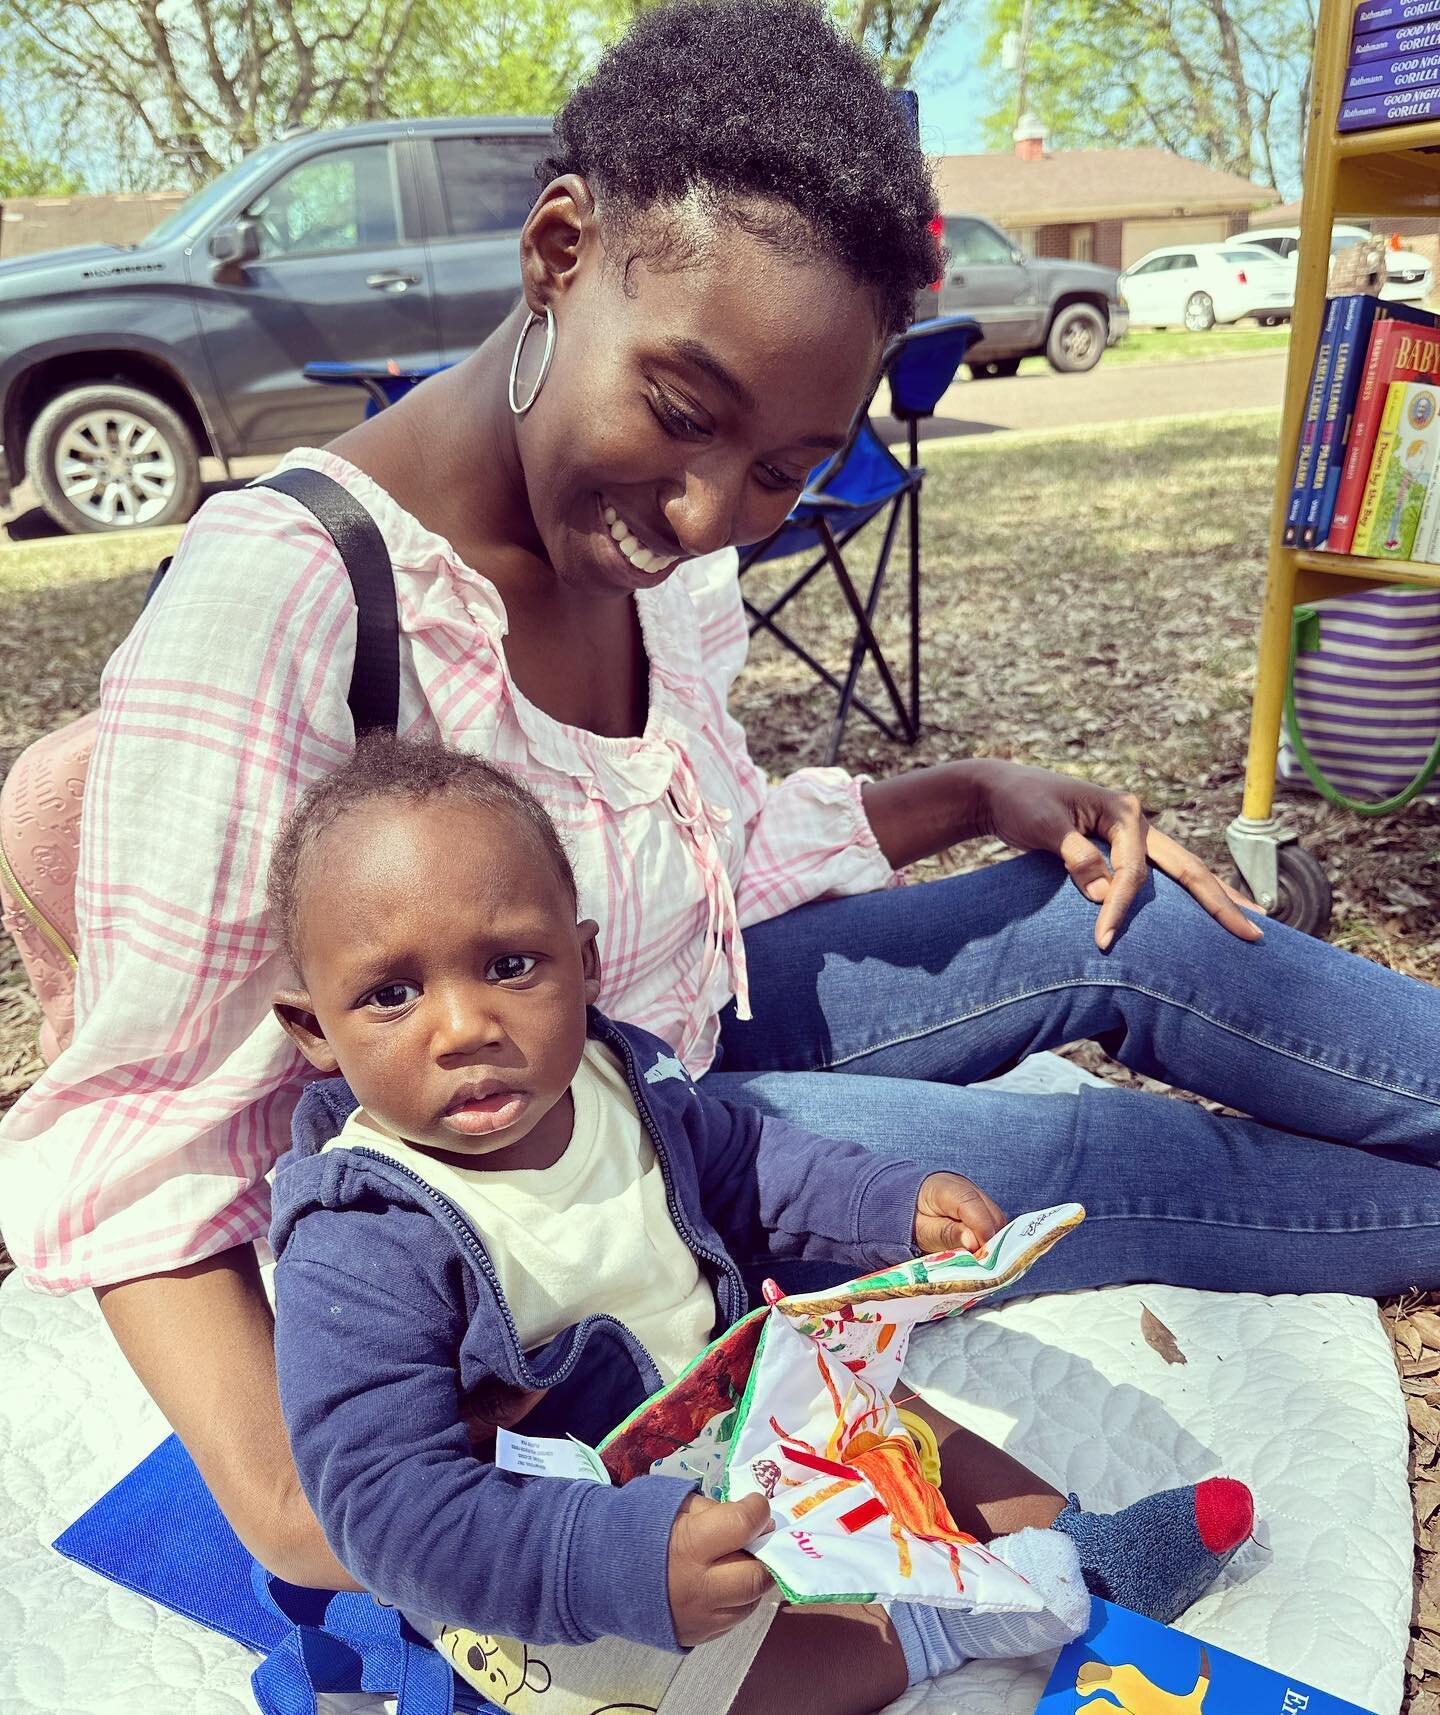 A mother&rsquo;s love liberates- Maya Angelou.  #mothers #grandmothers #aunts #toallthemothers #literacy #liberates #mississippi #letstalkaboutit #readingistherootofeverything #earlychildhoodeducation #itsnevertooearly #languagedevelopment #community